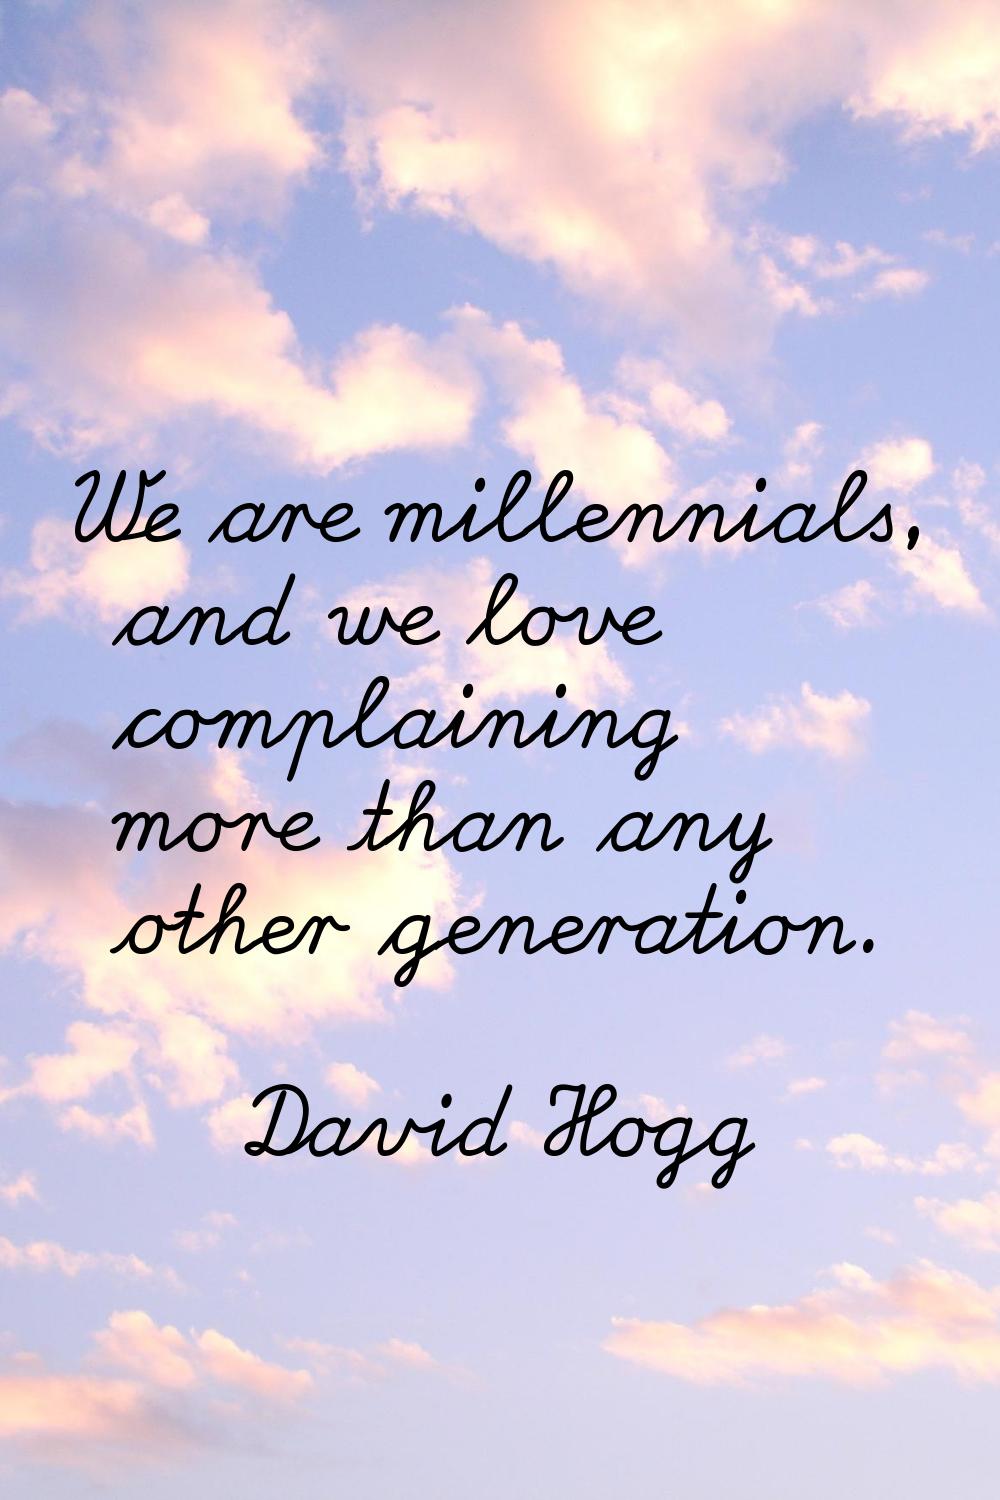 We are millennials, and we love complaining more than any other generation.